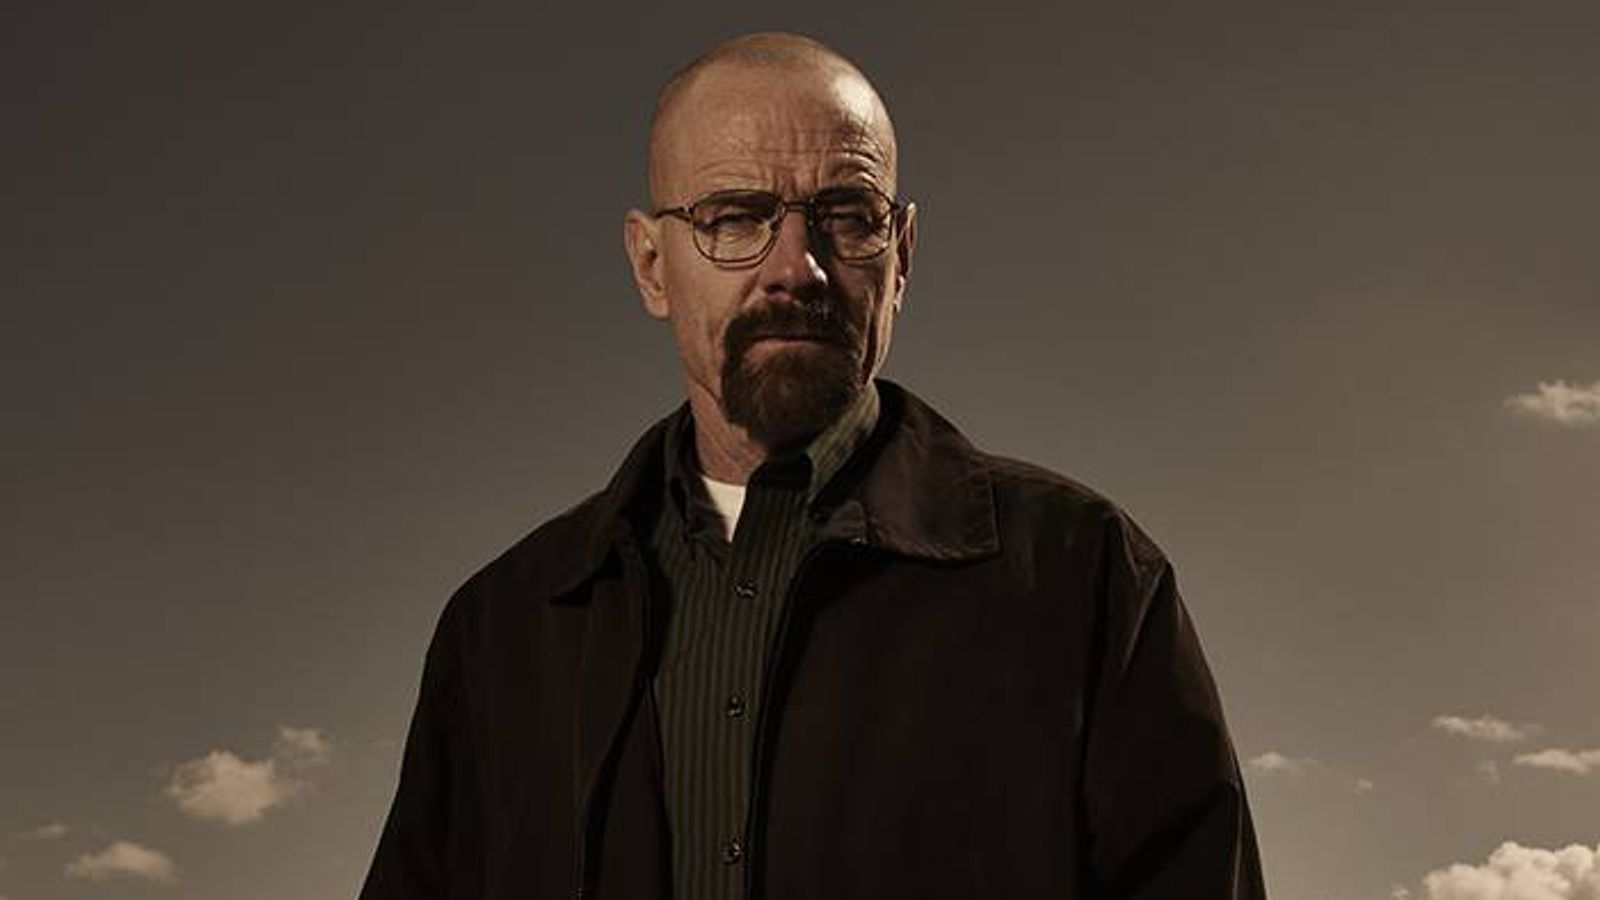 Breaking Bad: Bryan Cranston confirms film based on hit show is in works, Ents & Arts News